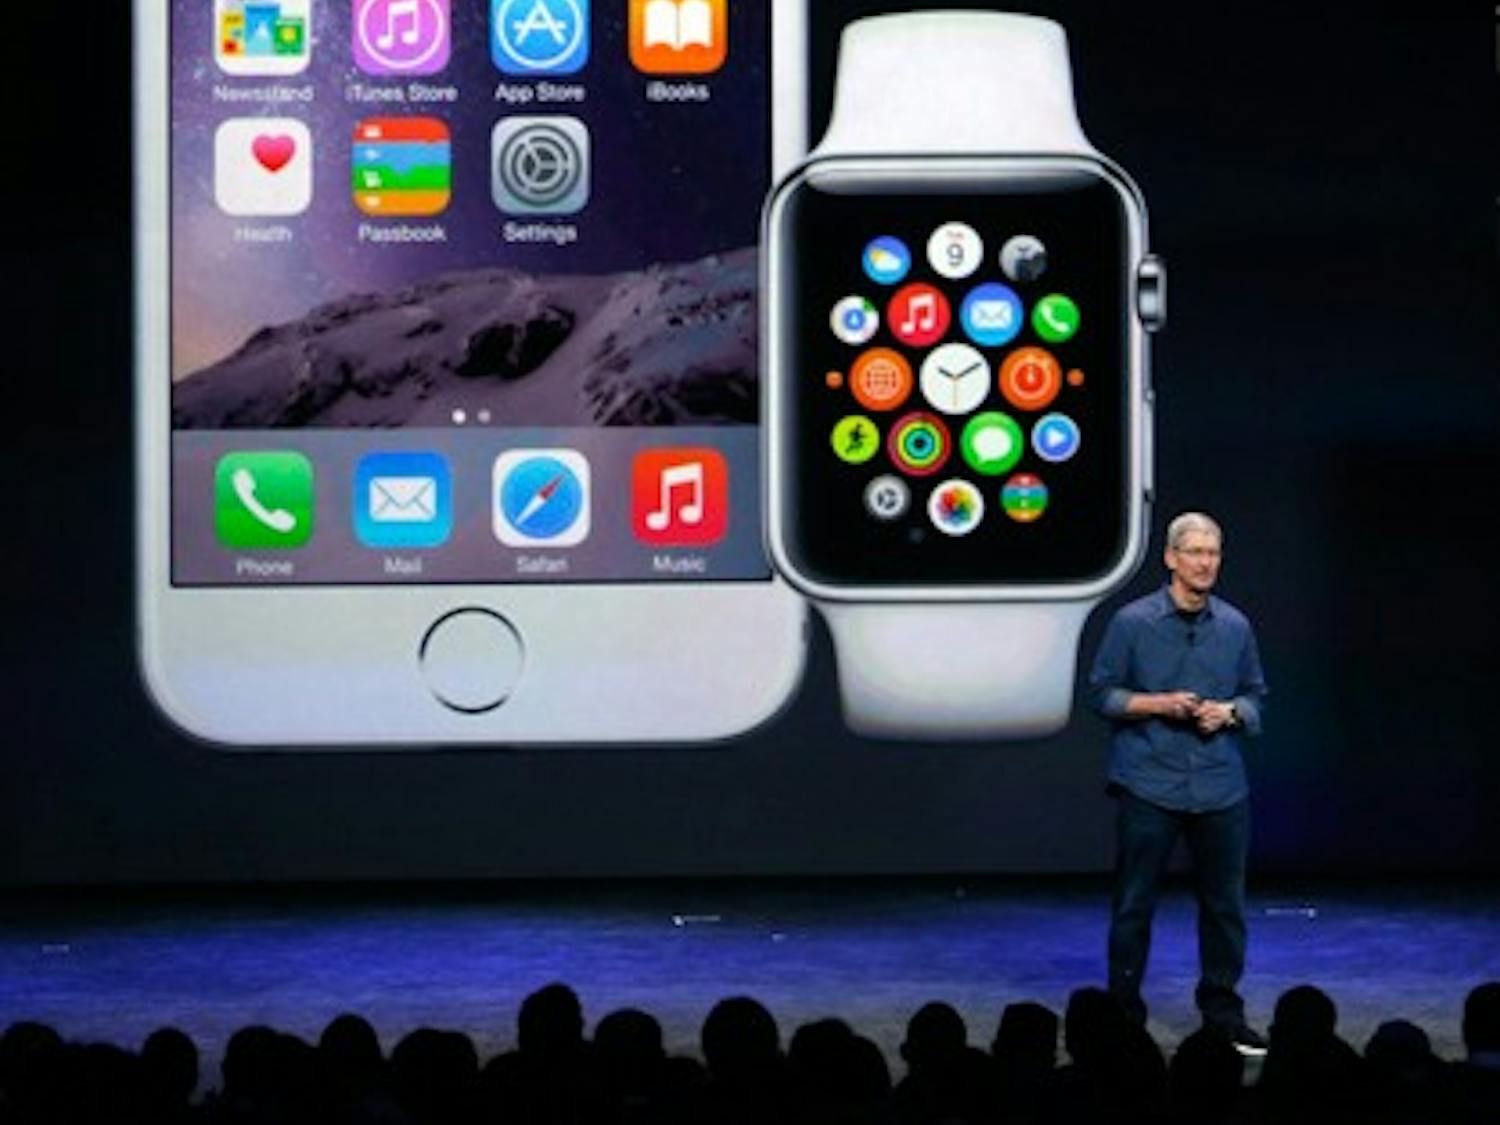 Apple CEO Tim Cook introduces the iPhone 6 and the Apple smartwatch at the Flint Center on Tuesday, Sept. 9, 2014, in Cupertino, Calif. (Karl Mondon/Bay Area News Group/MCT) 